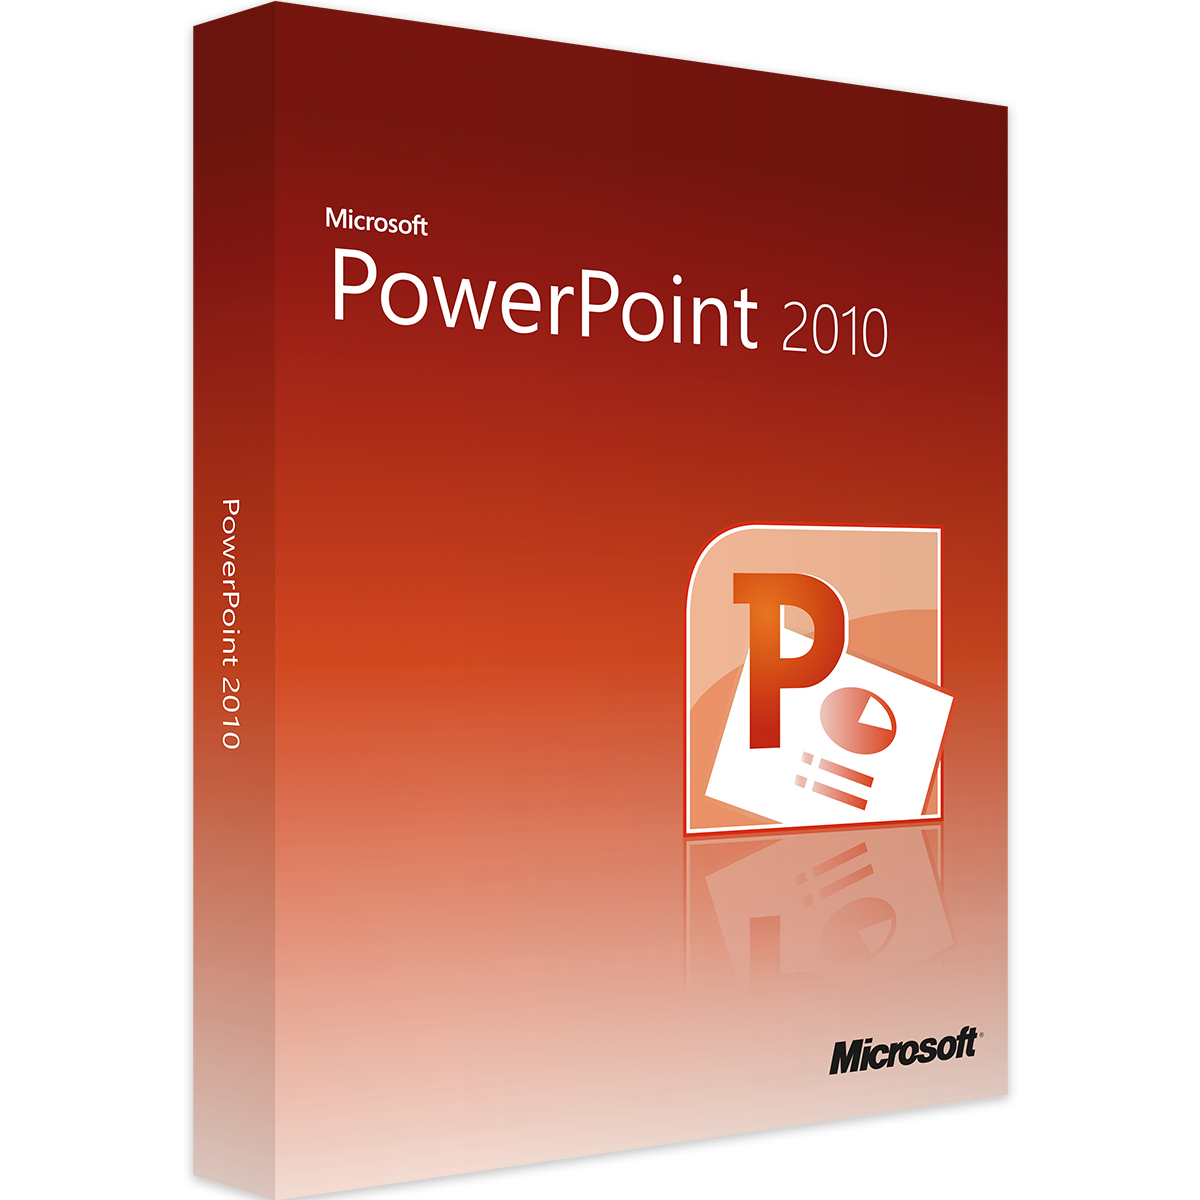 powerpoint 2010 download free full version